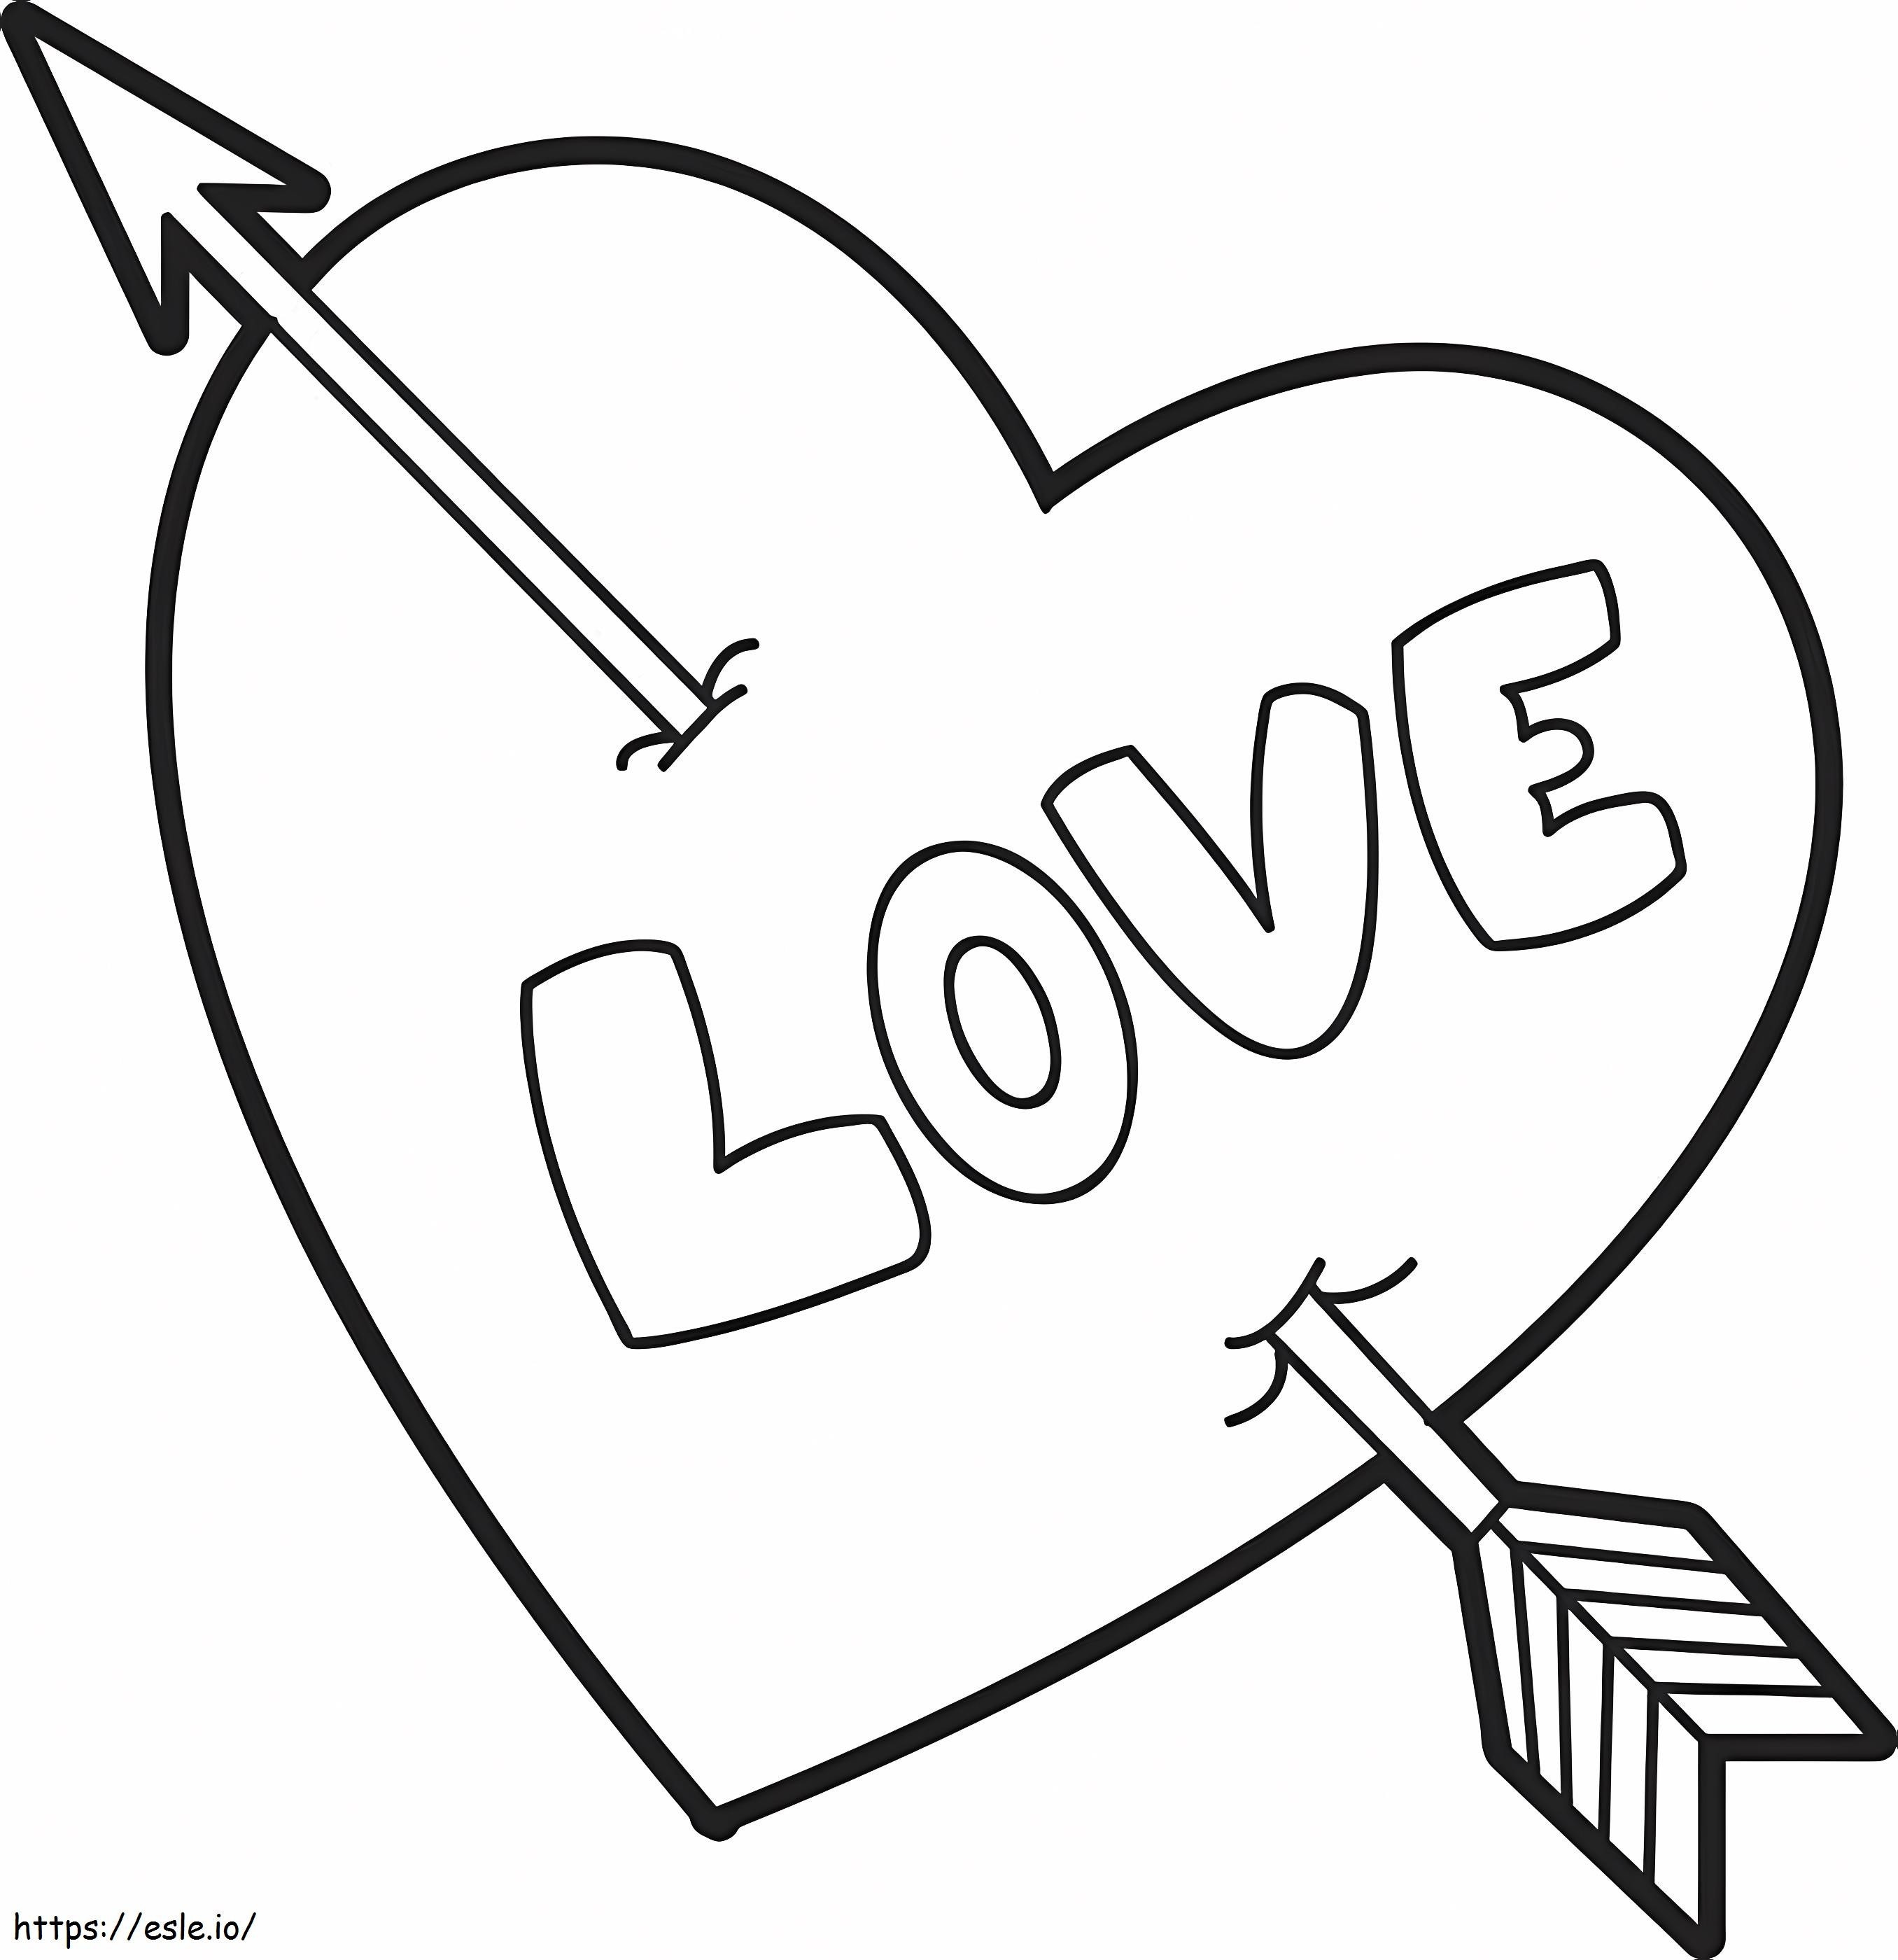 Love Heart coloring page